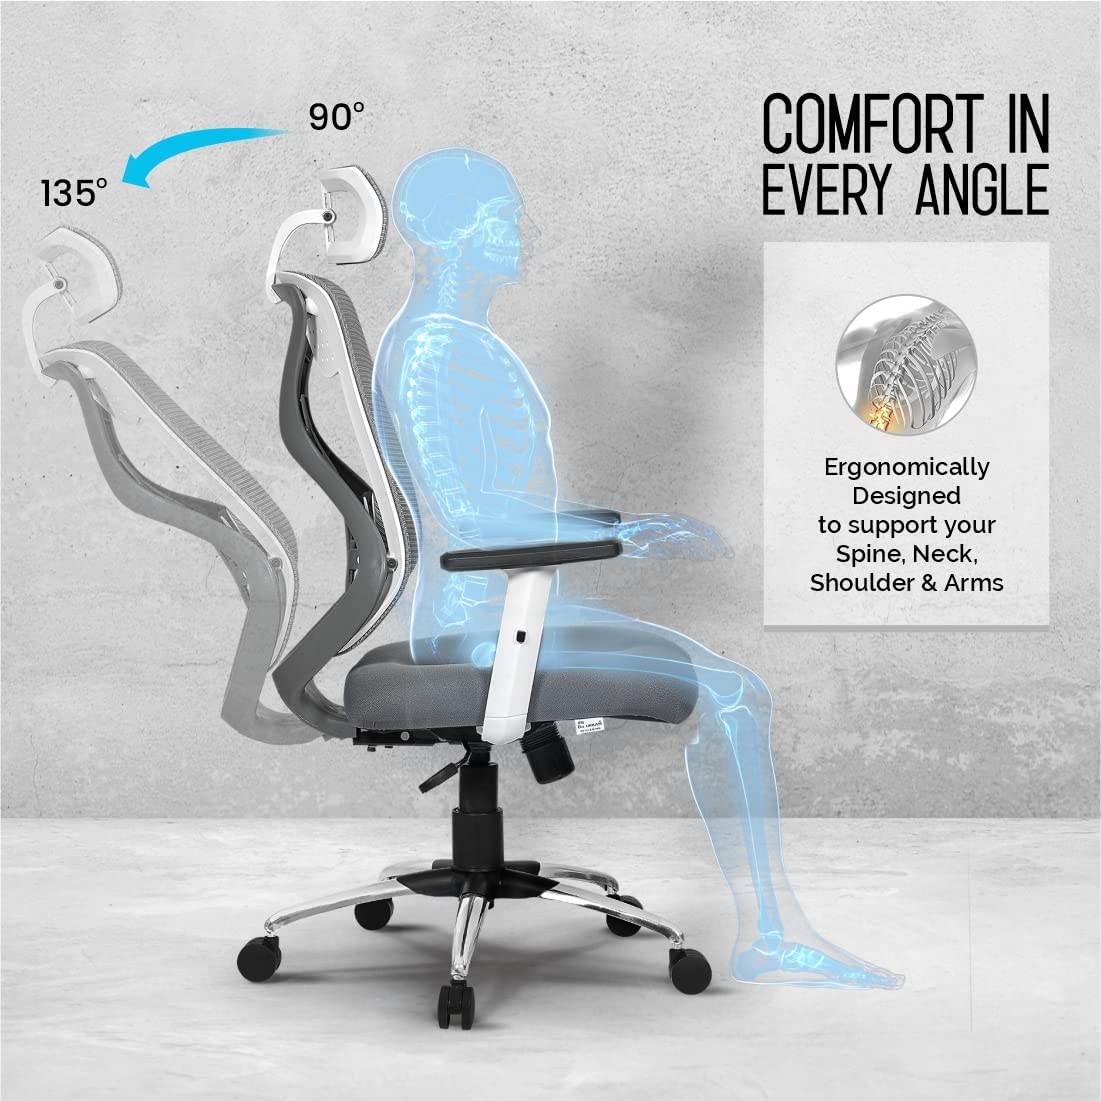 SmileSellers Hector Multi-Purpose Gaming Chair, High Back Mesh Ergonomic Office Chair, Desk Chair with 2D Adjustable Armrests, Smart Synchro Multi-Tilt Lock Mechanism | No Seat Slider